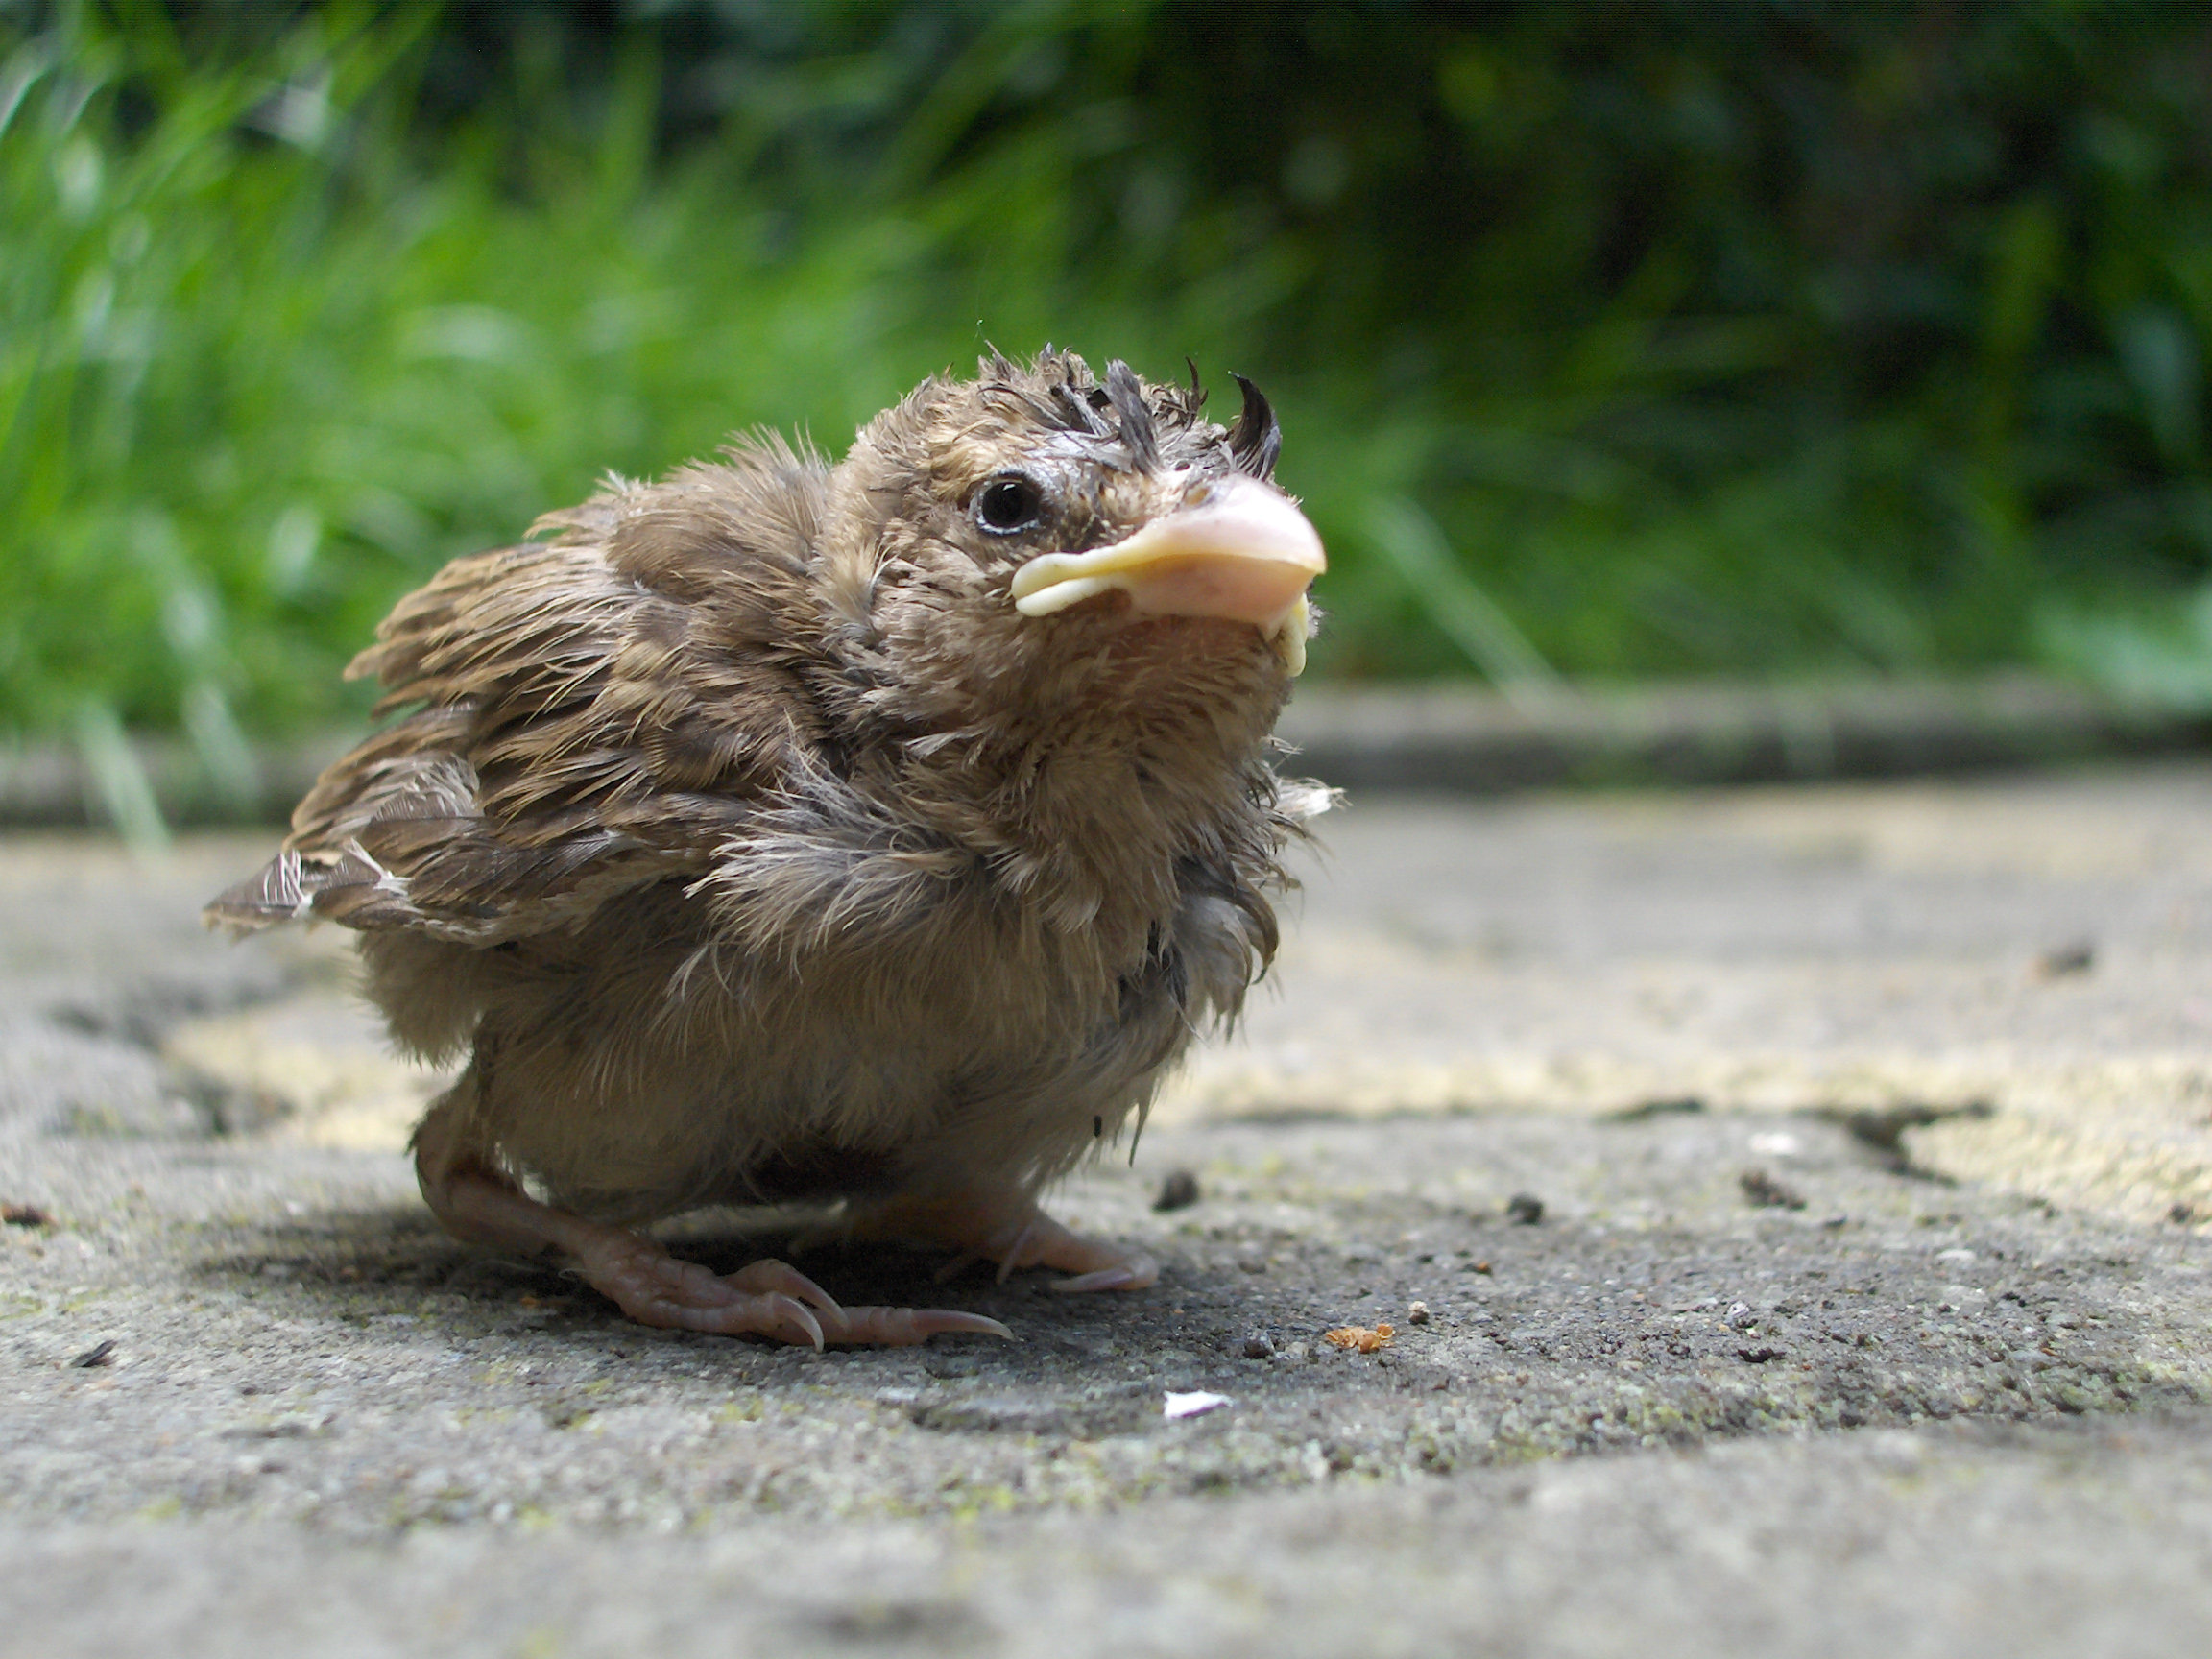 File:Sparrow chick.jpg - Wikimedia Commons